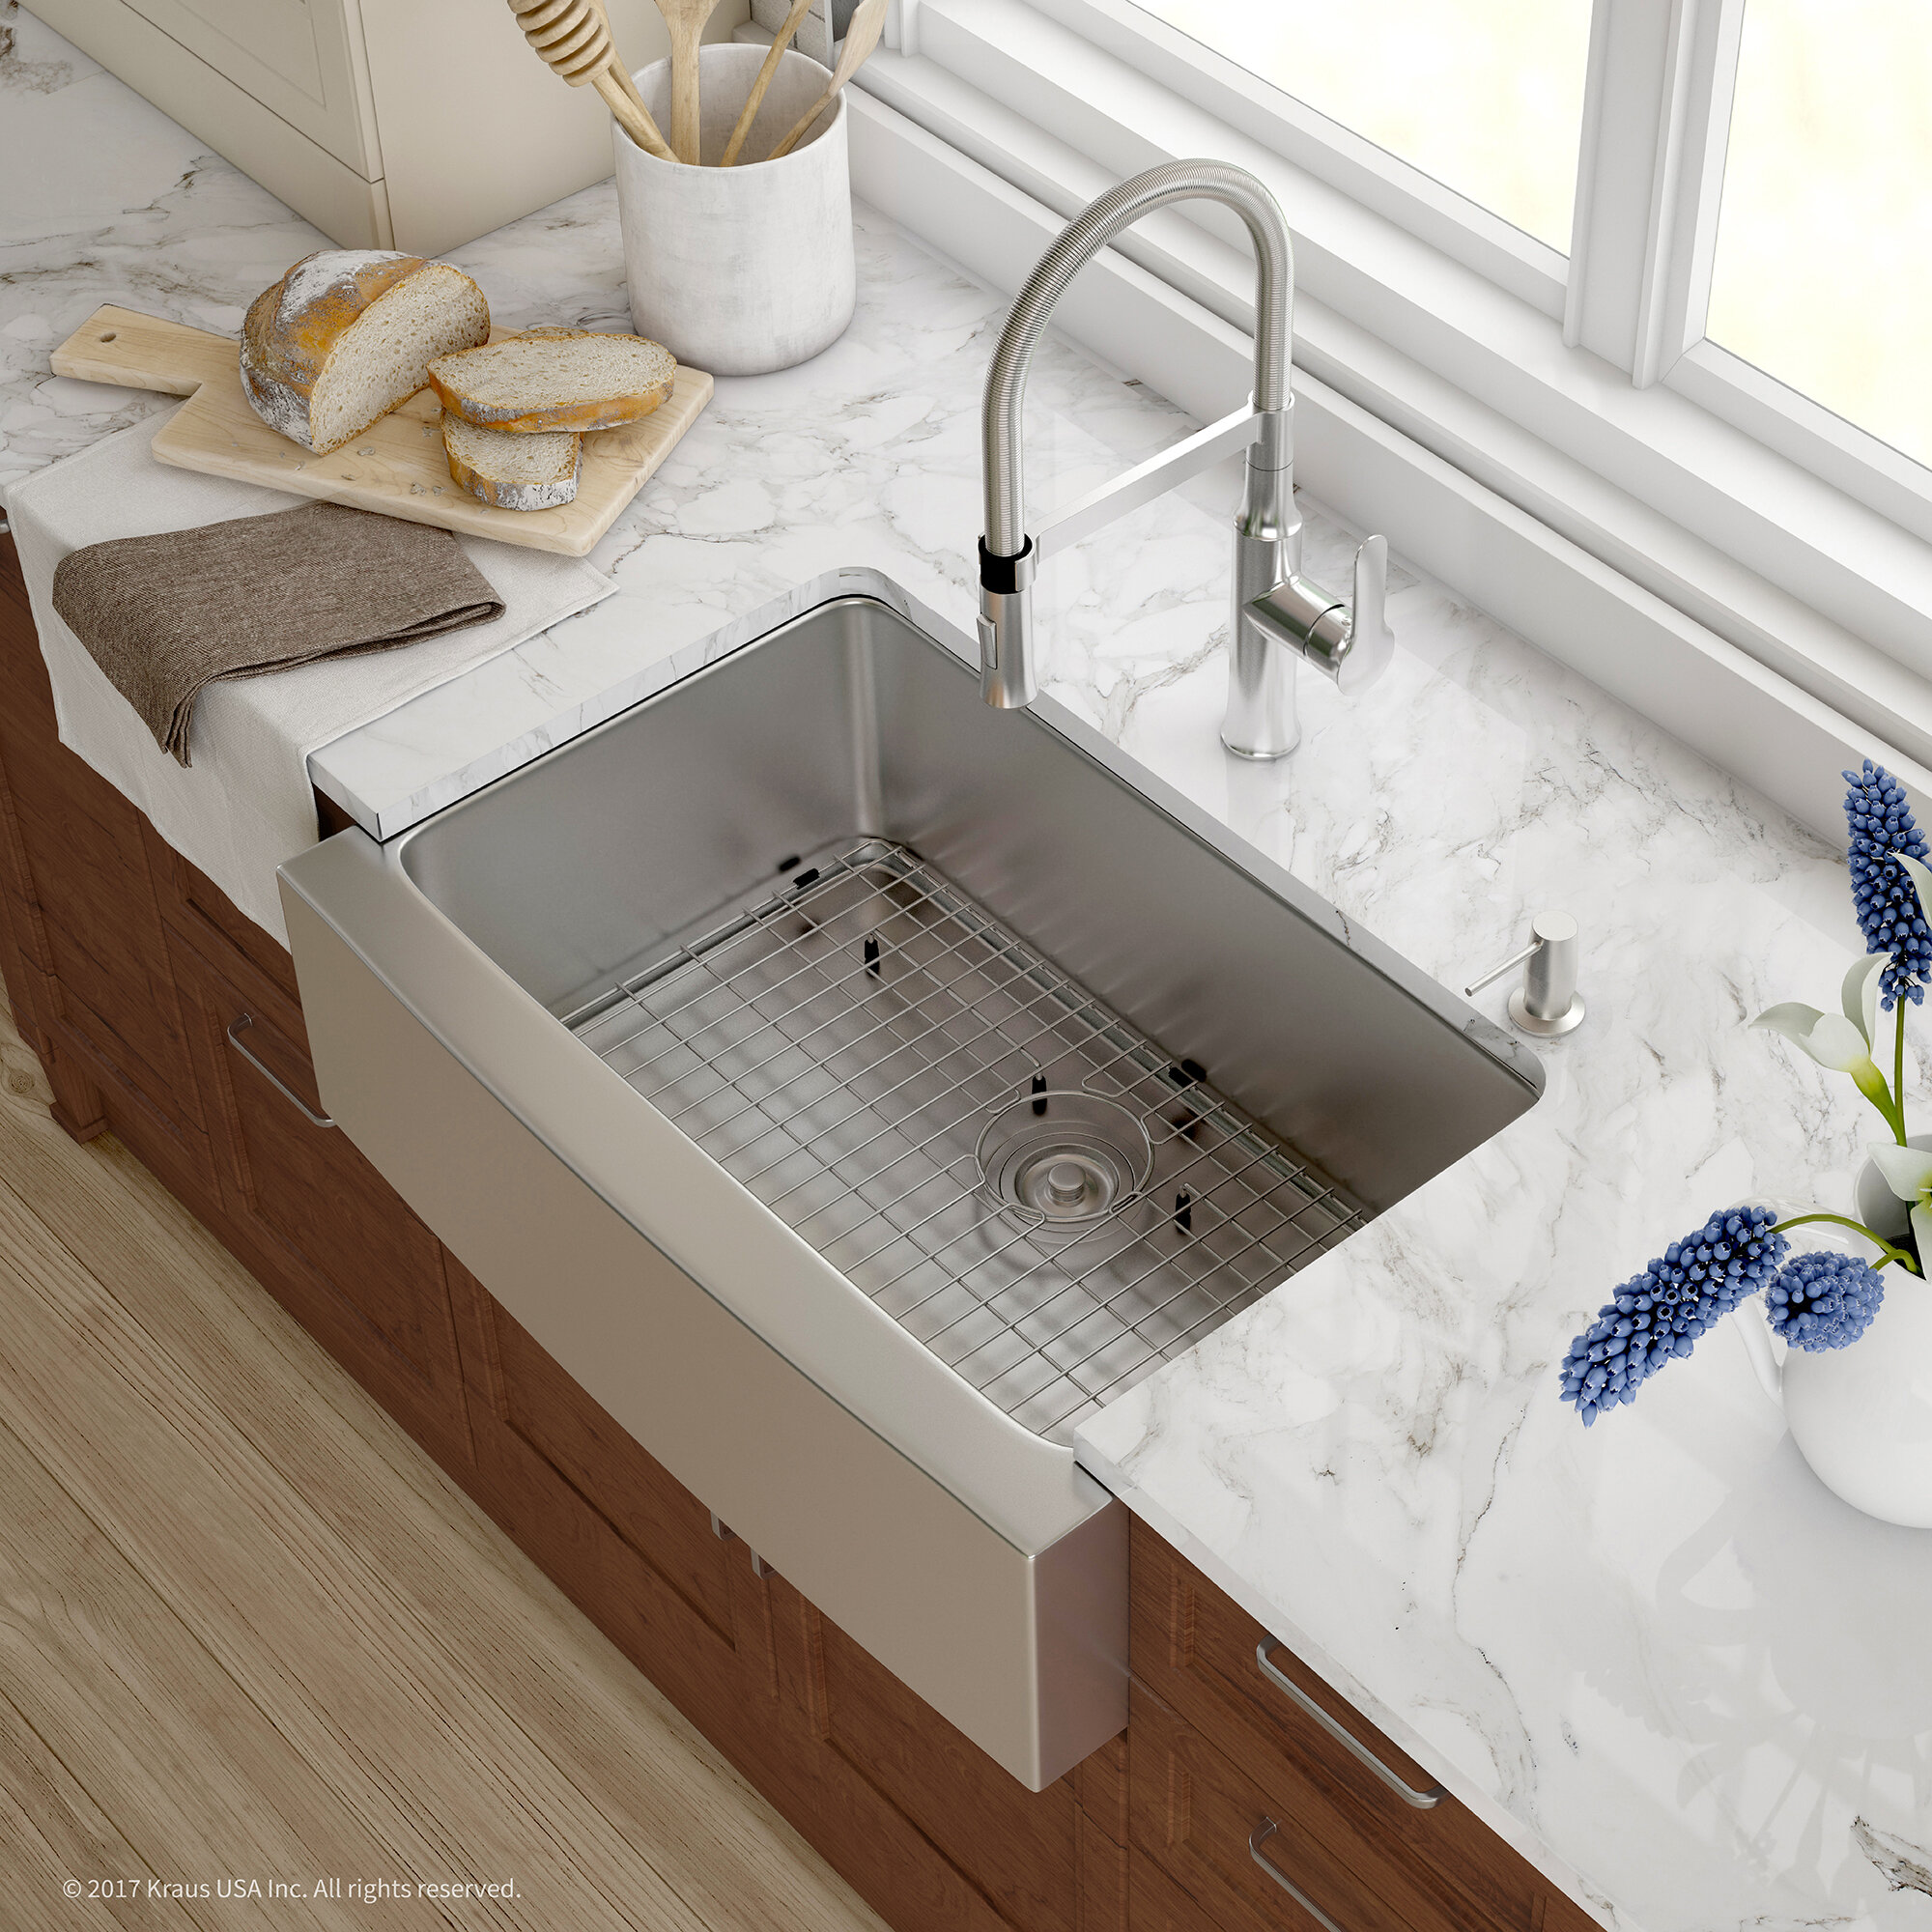 Handmade Series 29 75 X 20 75 Farmhouse Kitchen Sink With Faucet And Soap Dispenser